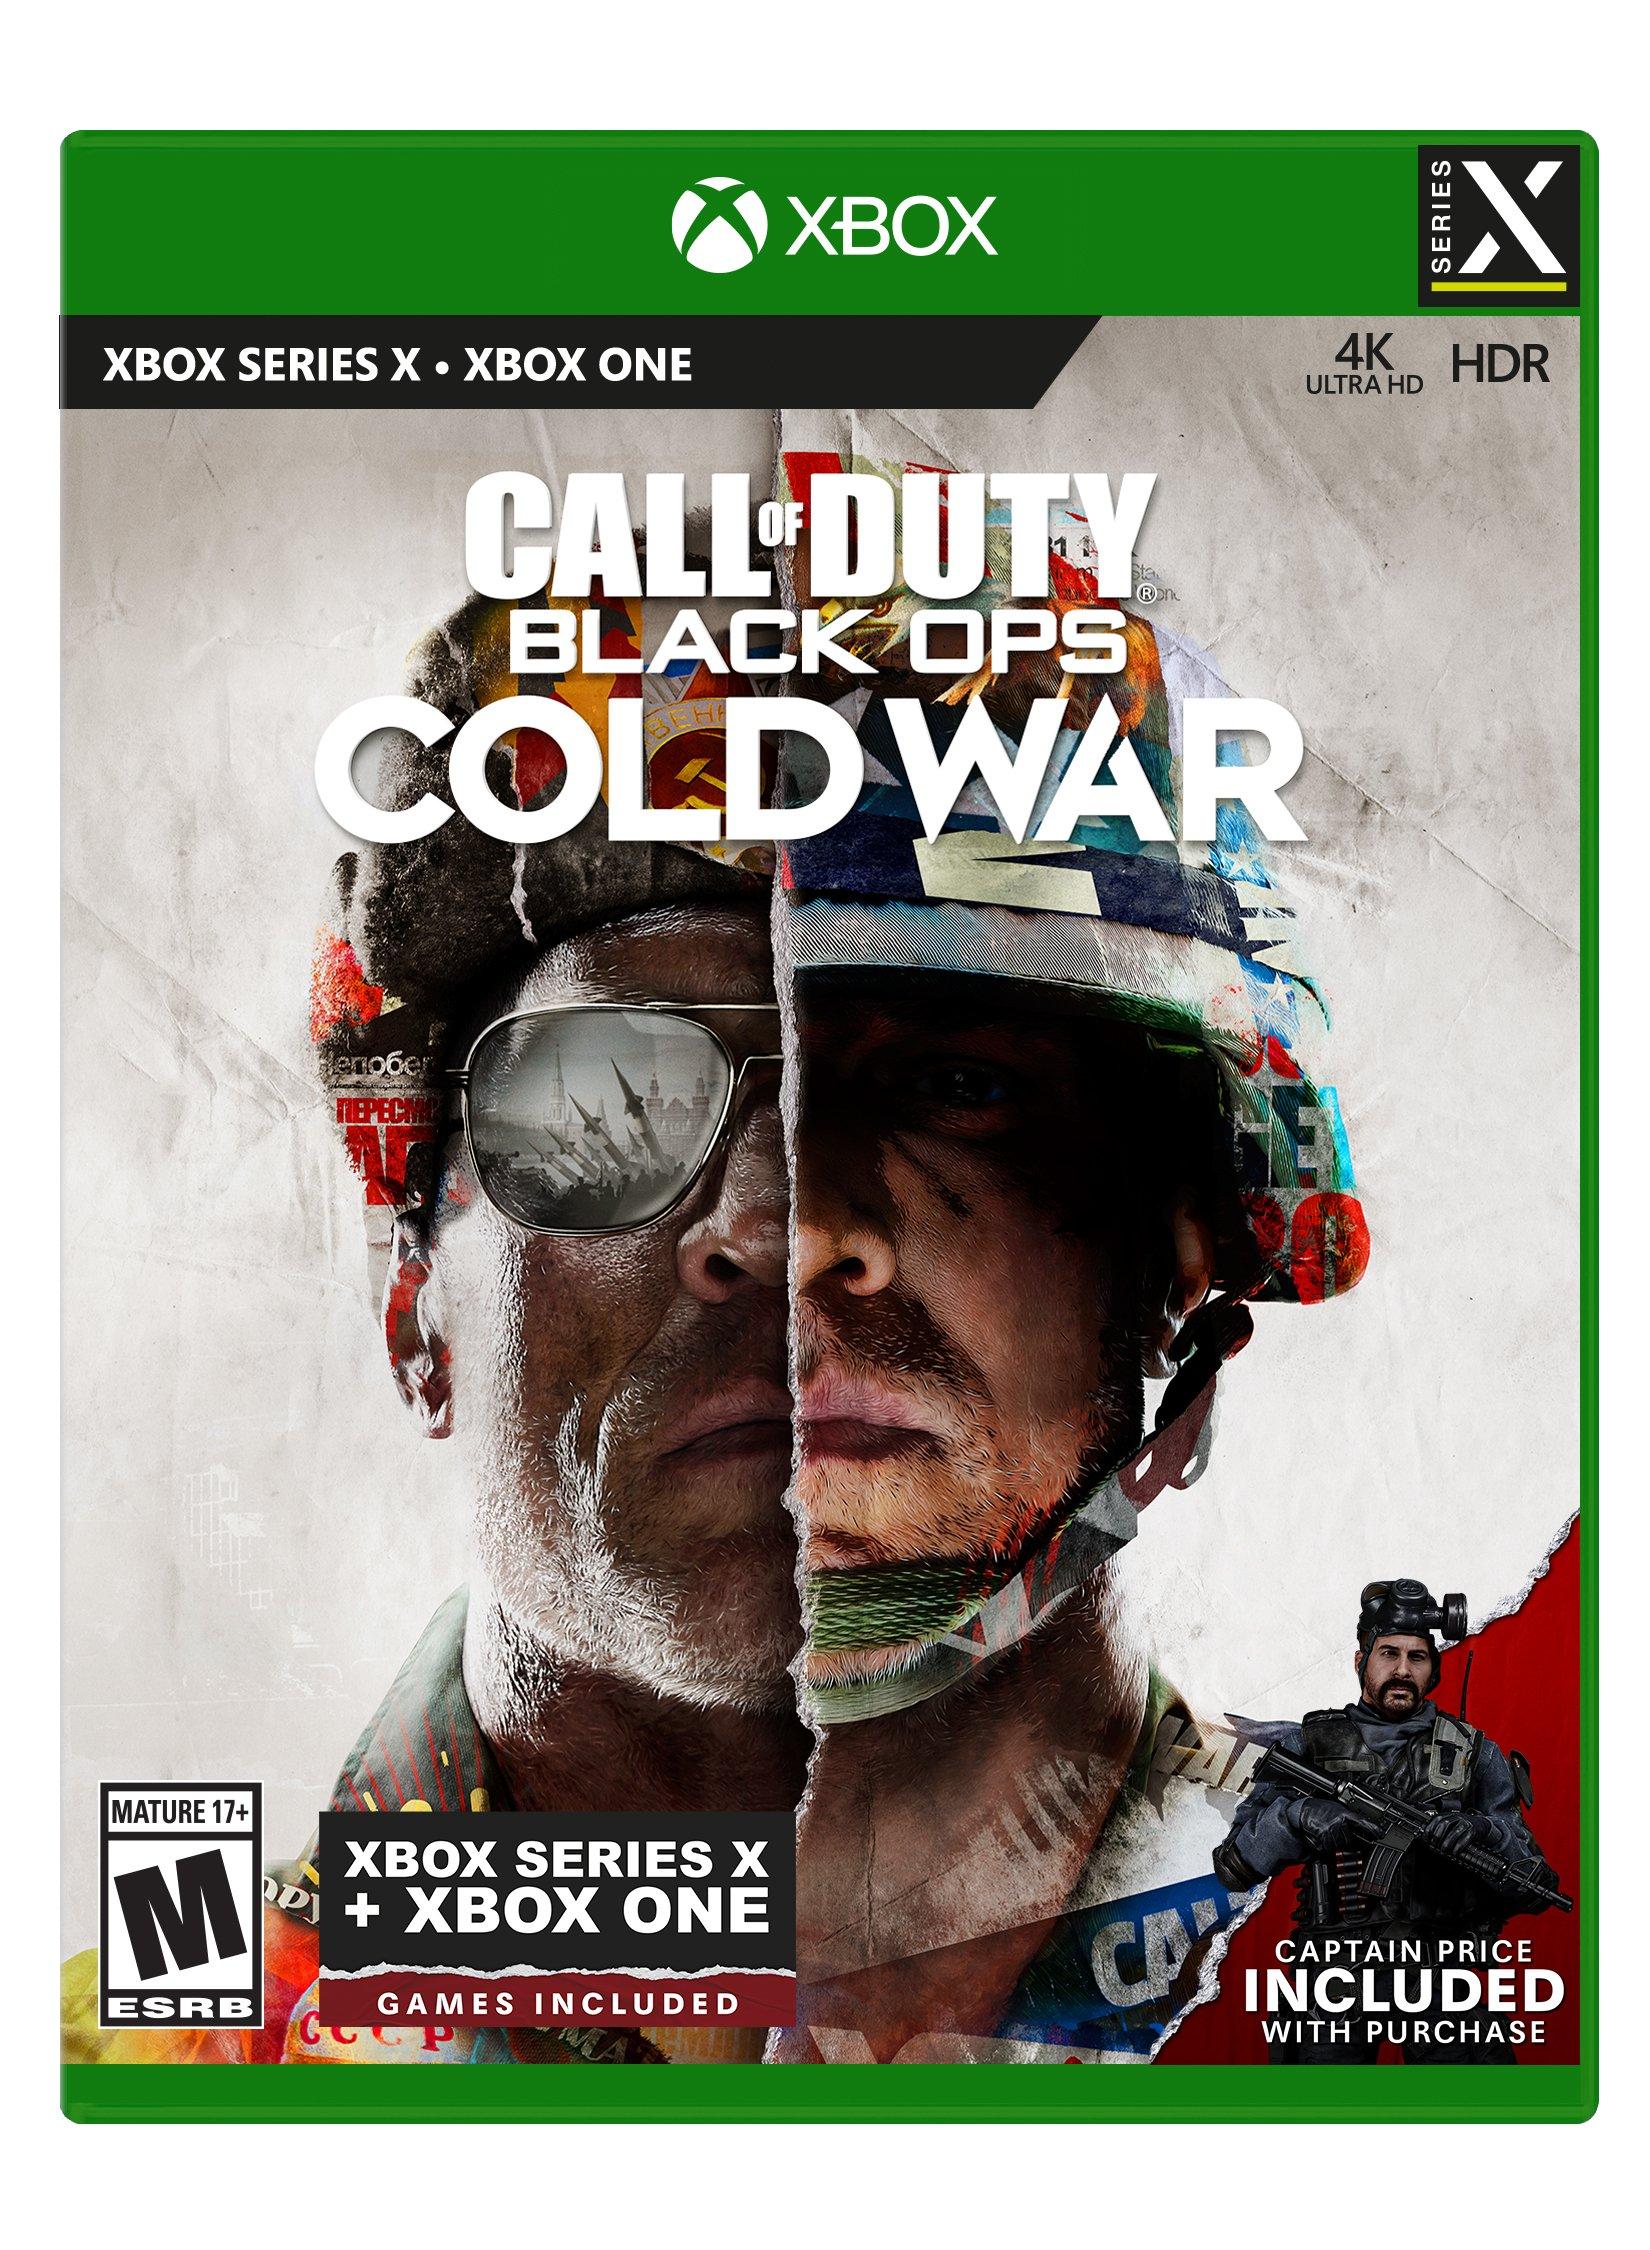 Call of Duty: Black Ops Cold War - Xbox Series X (Activision), New - GameStop